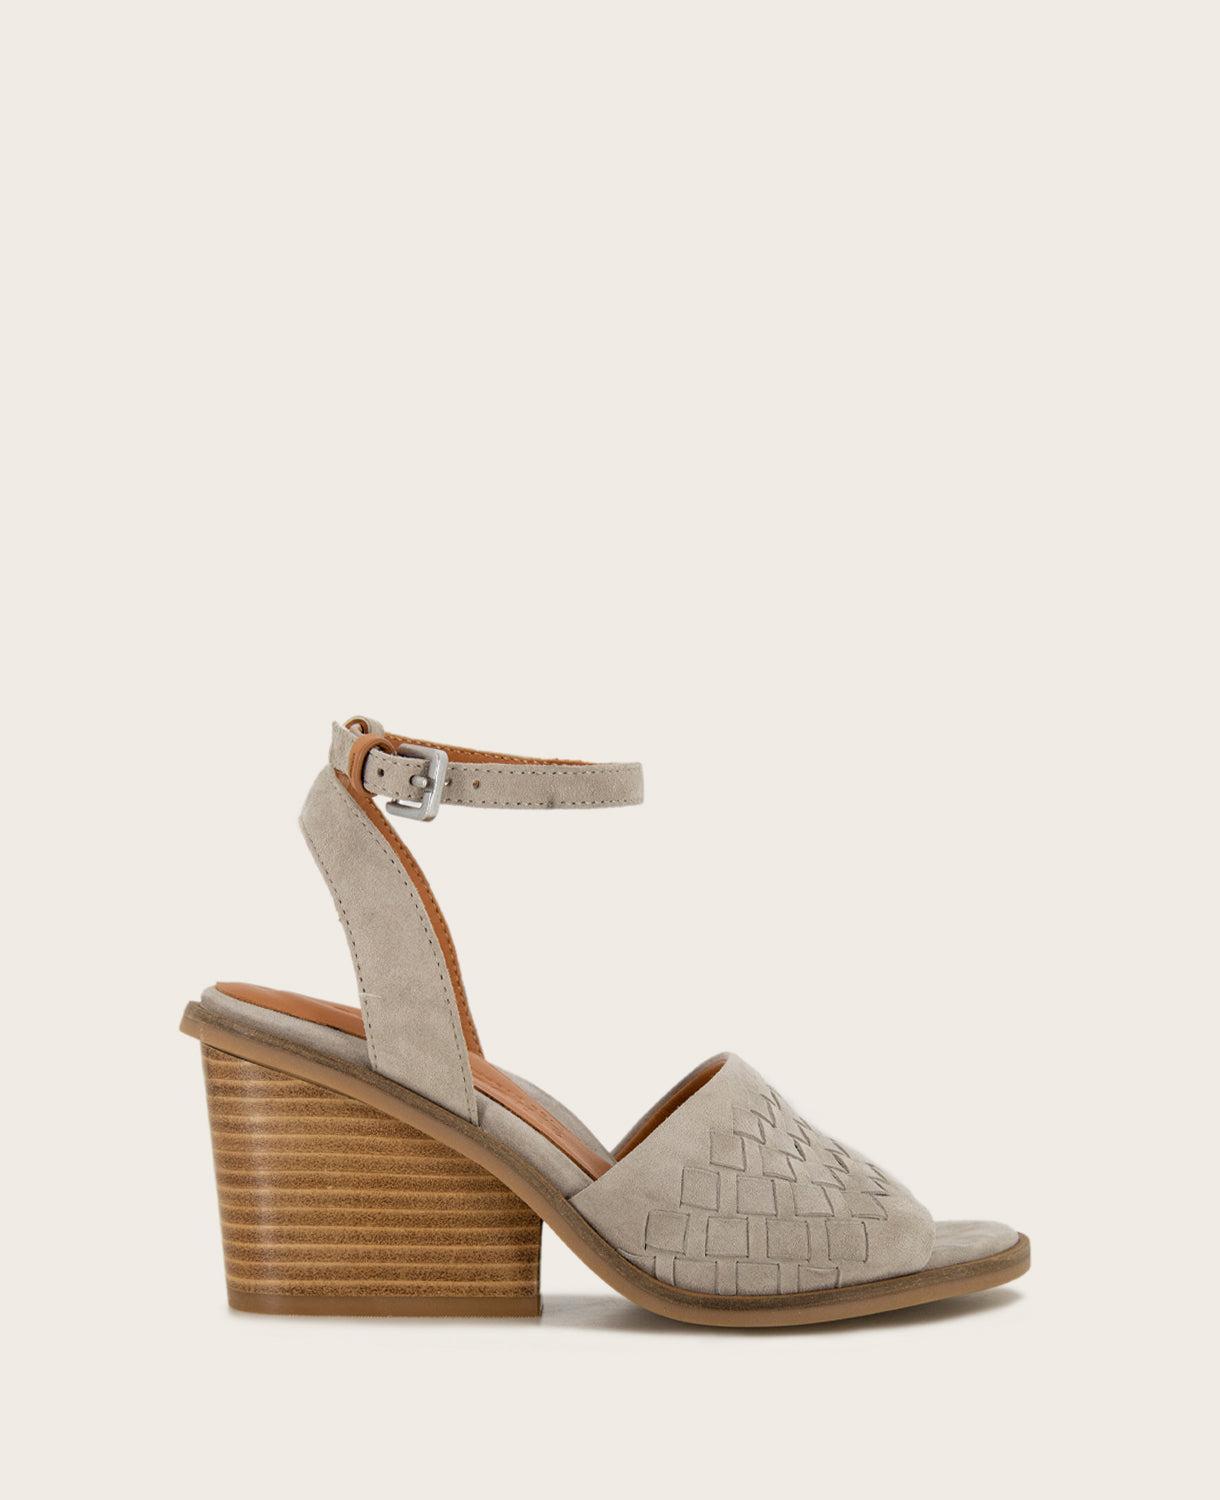 GENTLE SOULS BY KENNETH COLE Nadia Woven Wedge Sandal Product Image